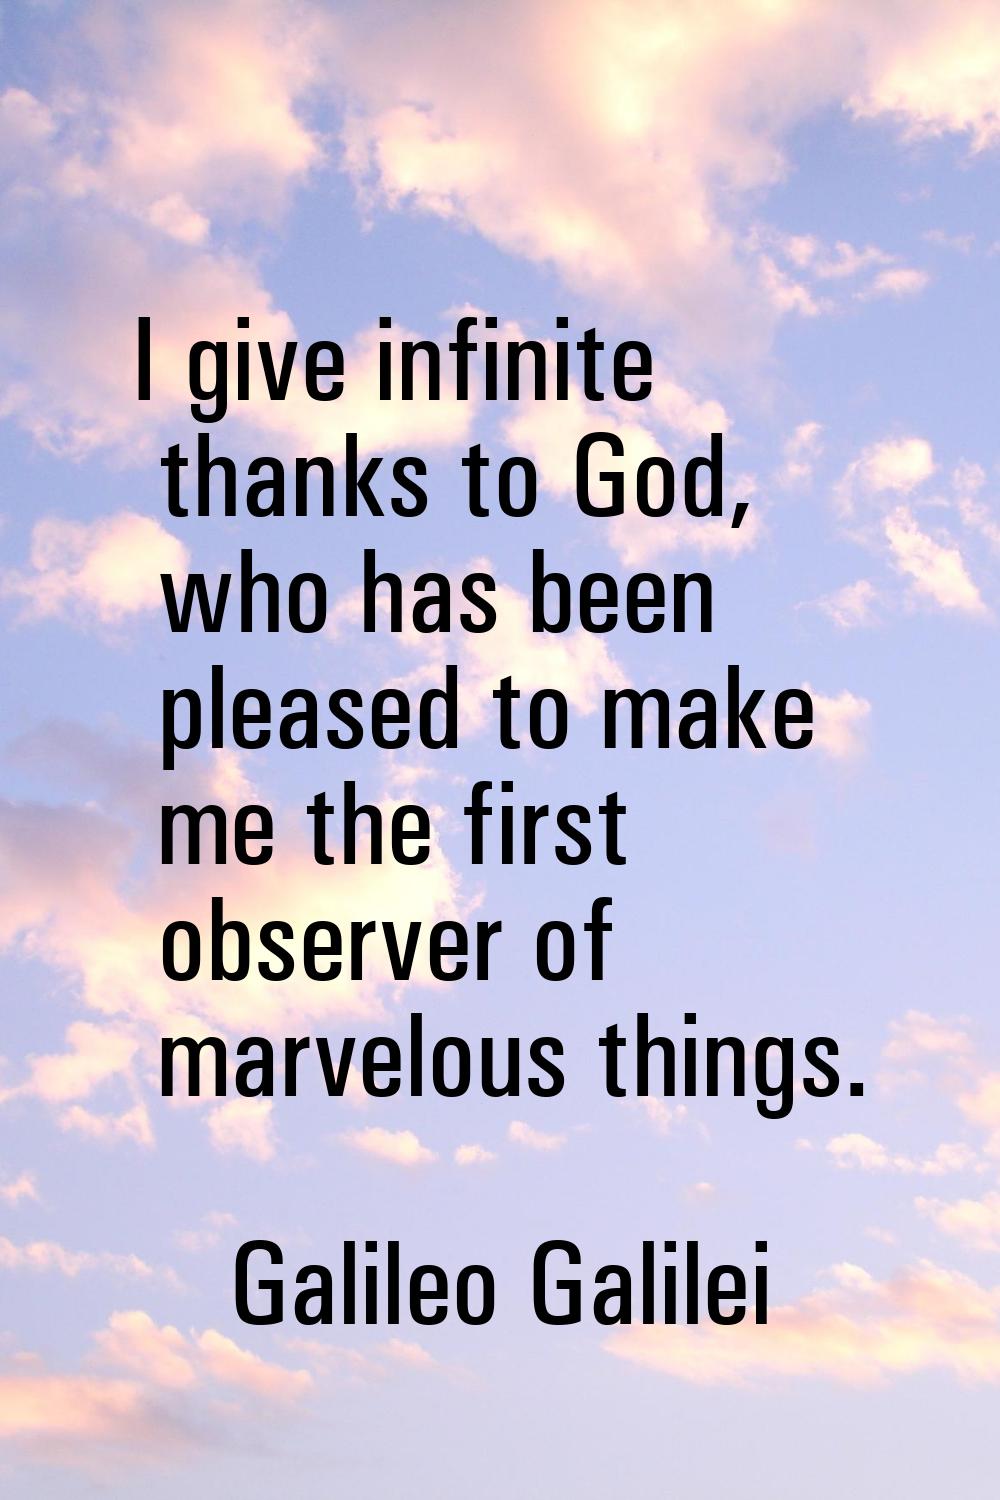 I give infinite thanks to God, who has been pleased to make me the first observer of marvelous thin